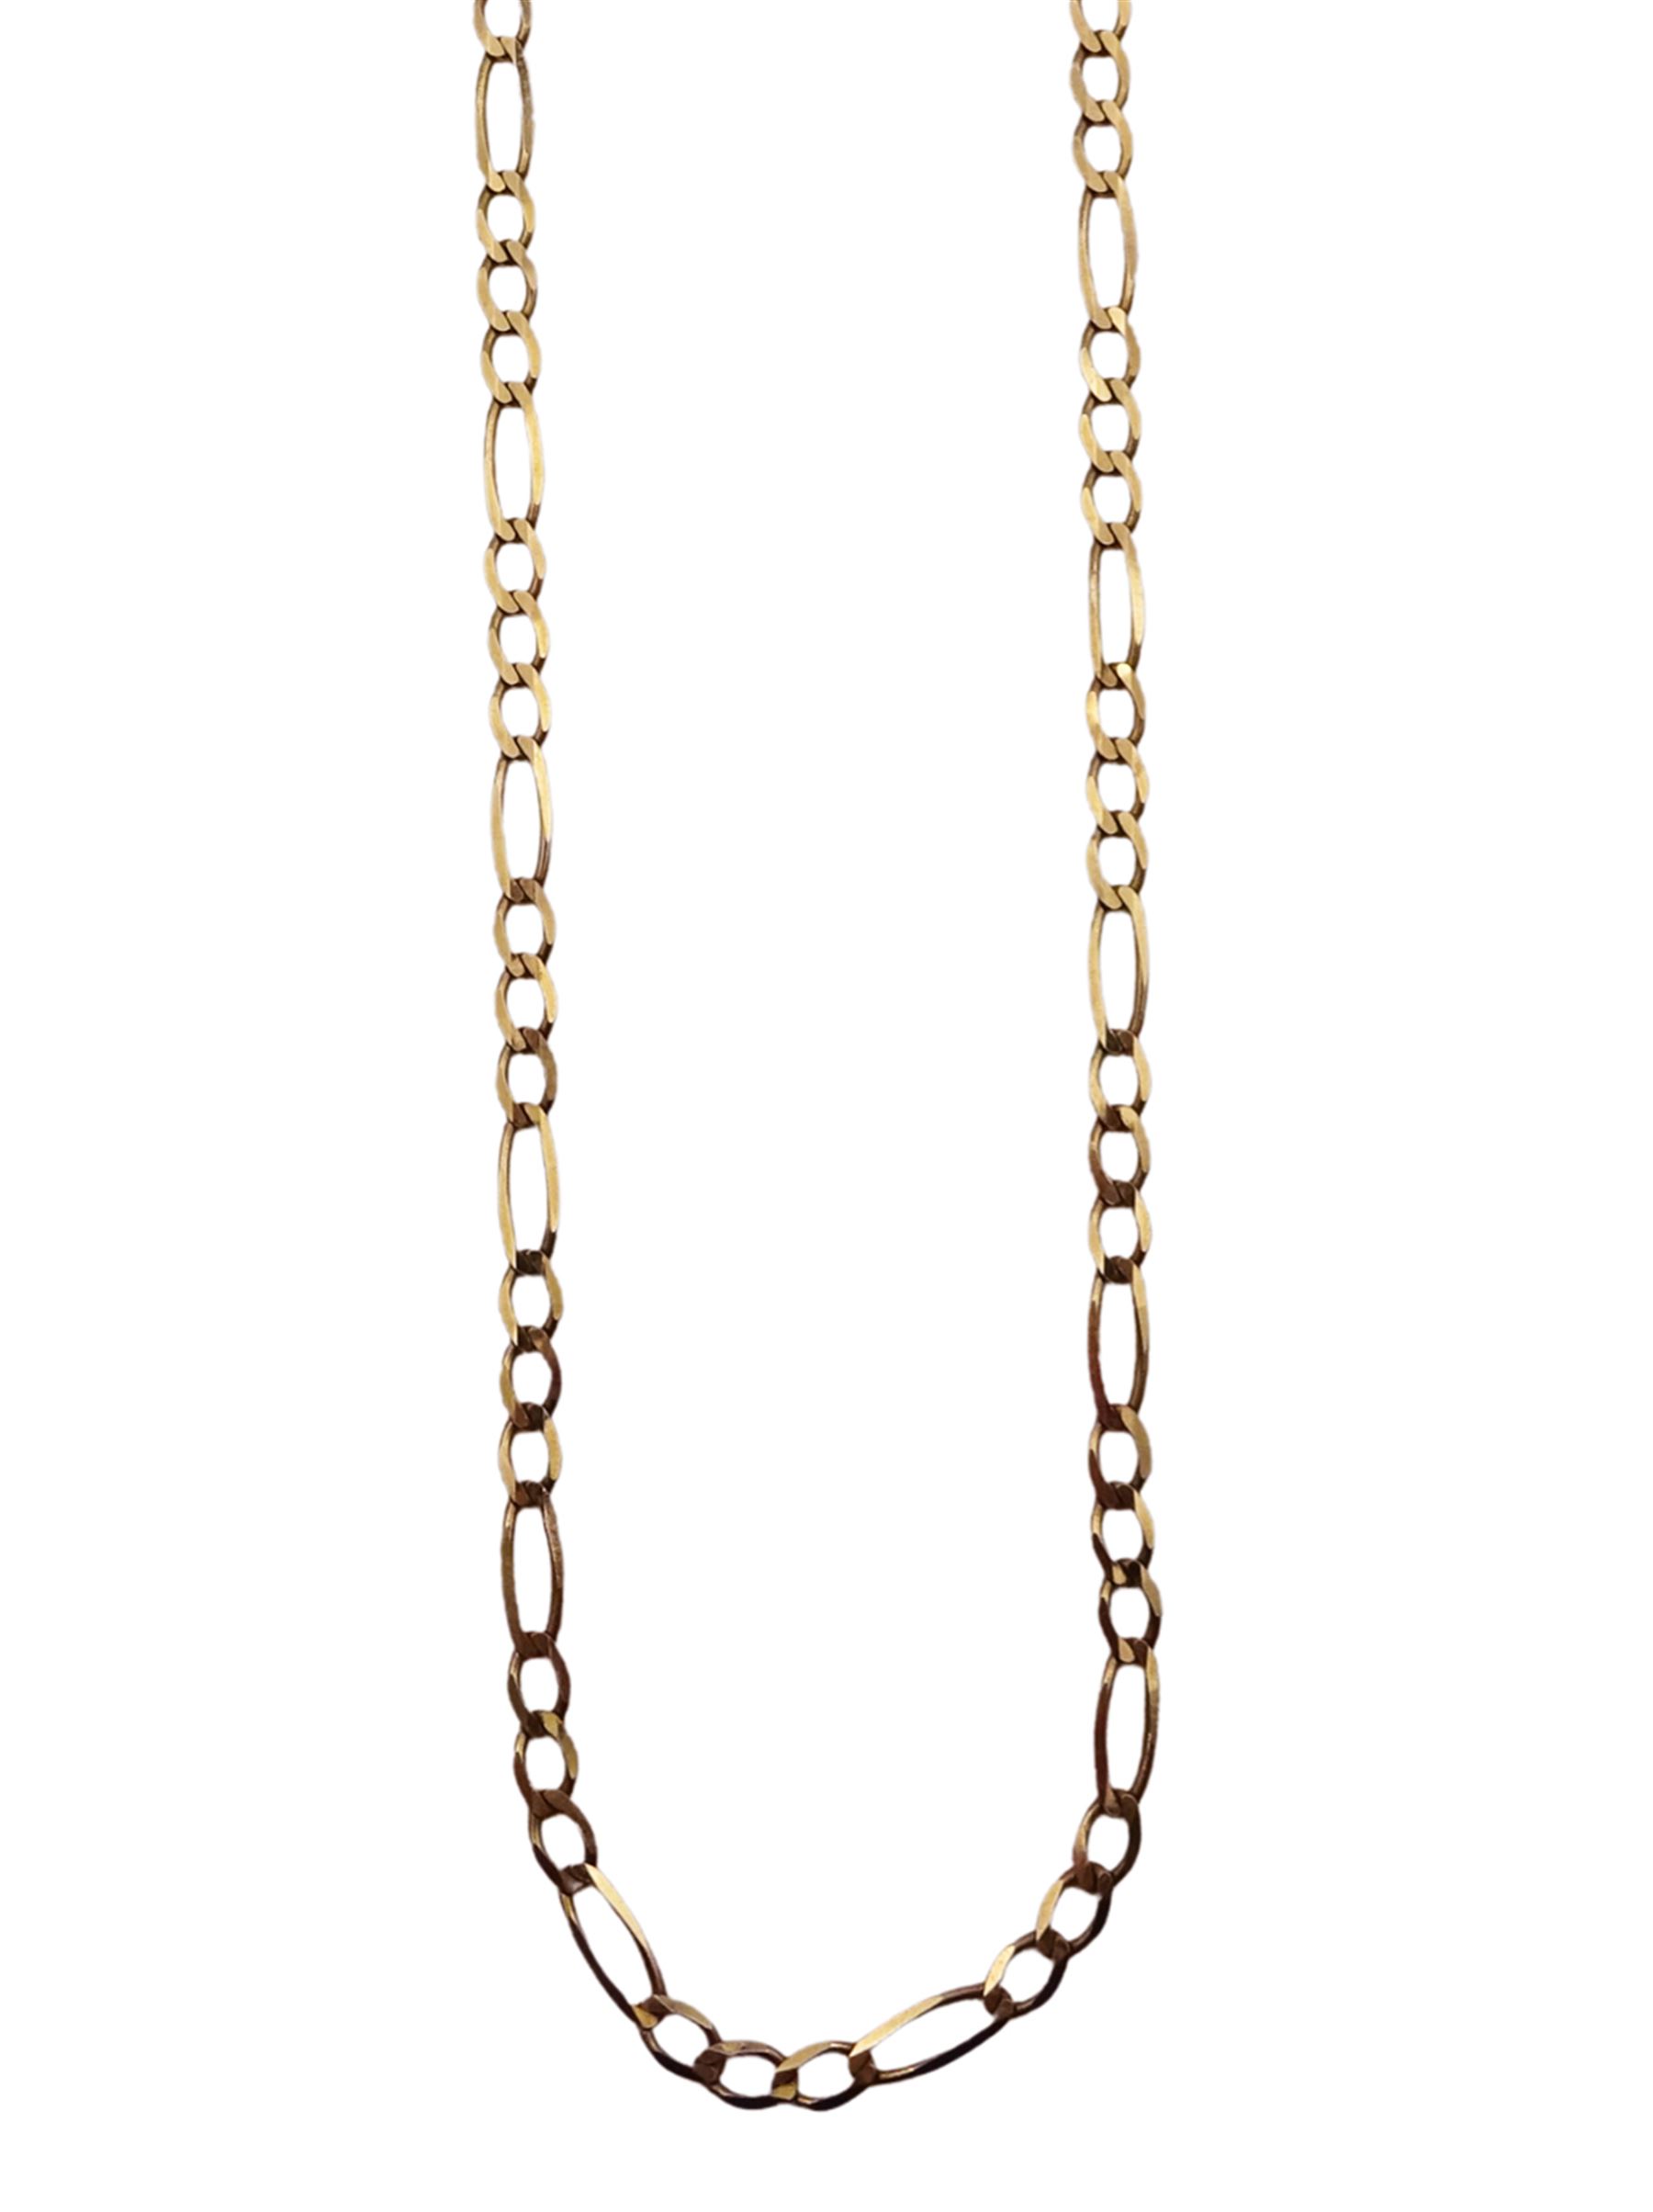 9ct gold Figaro link necklace